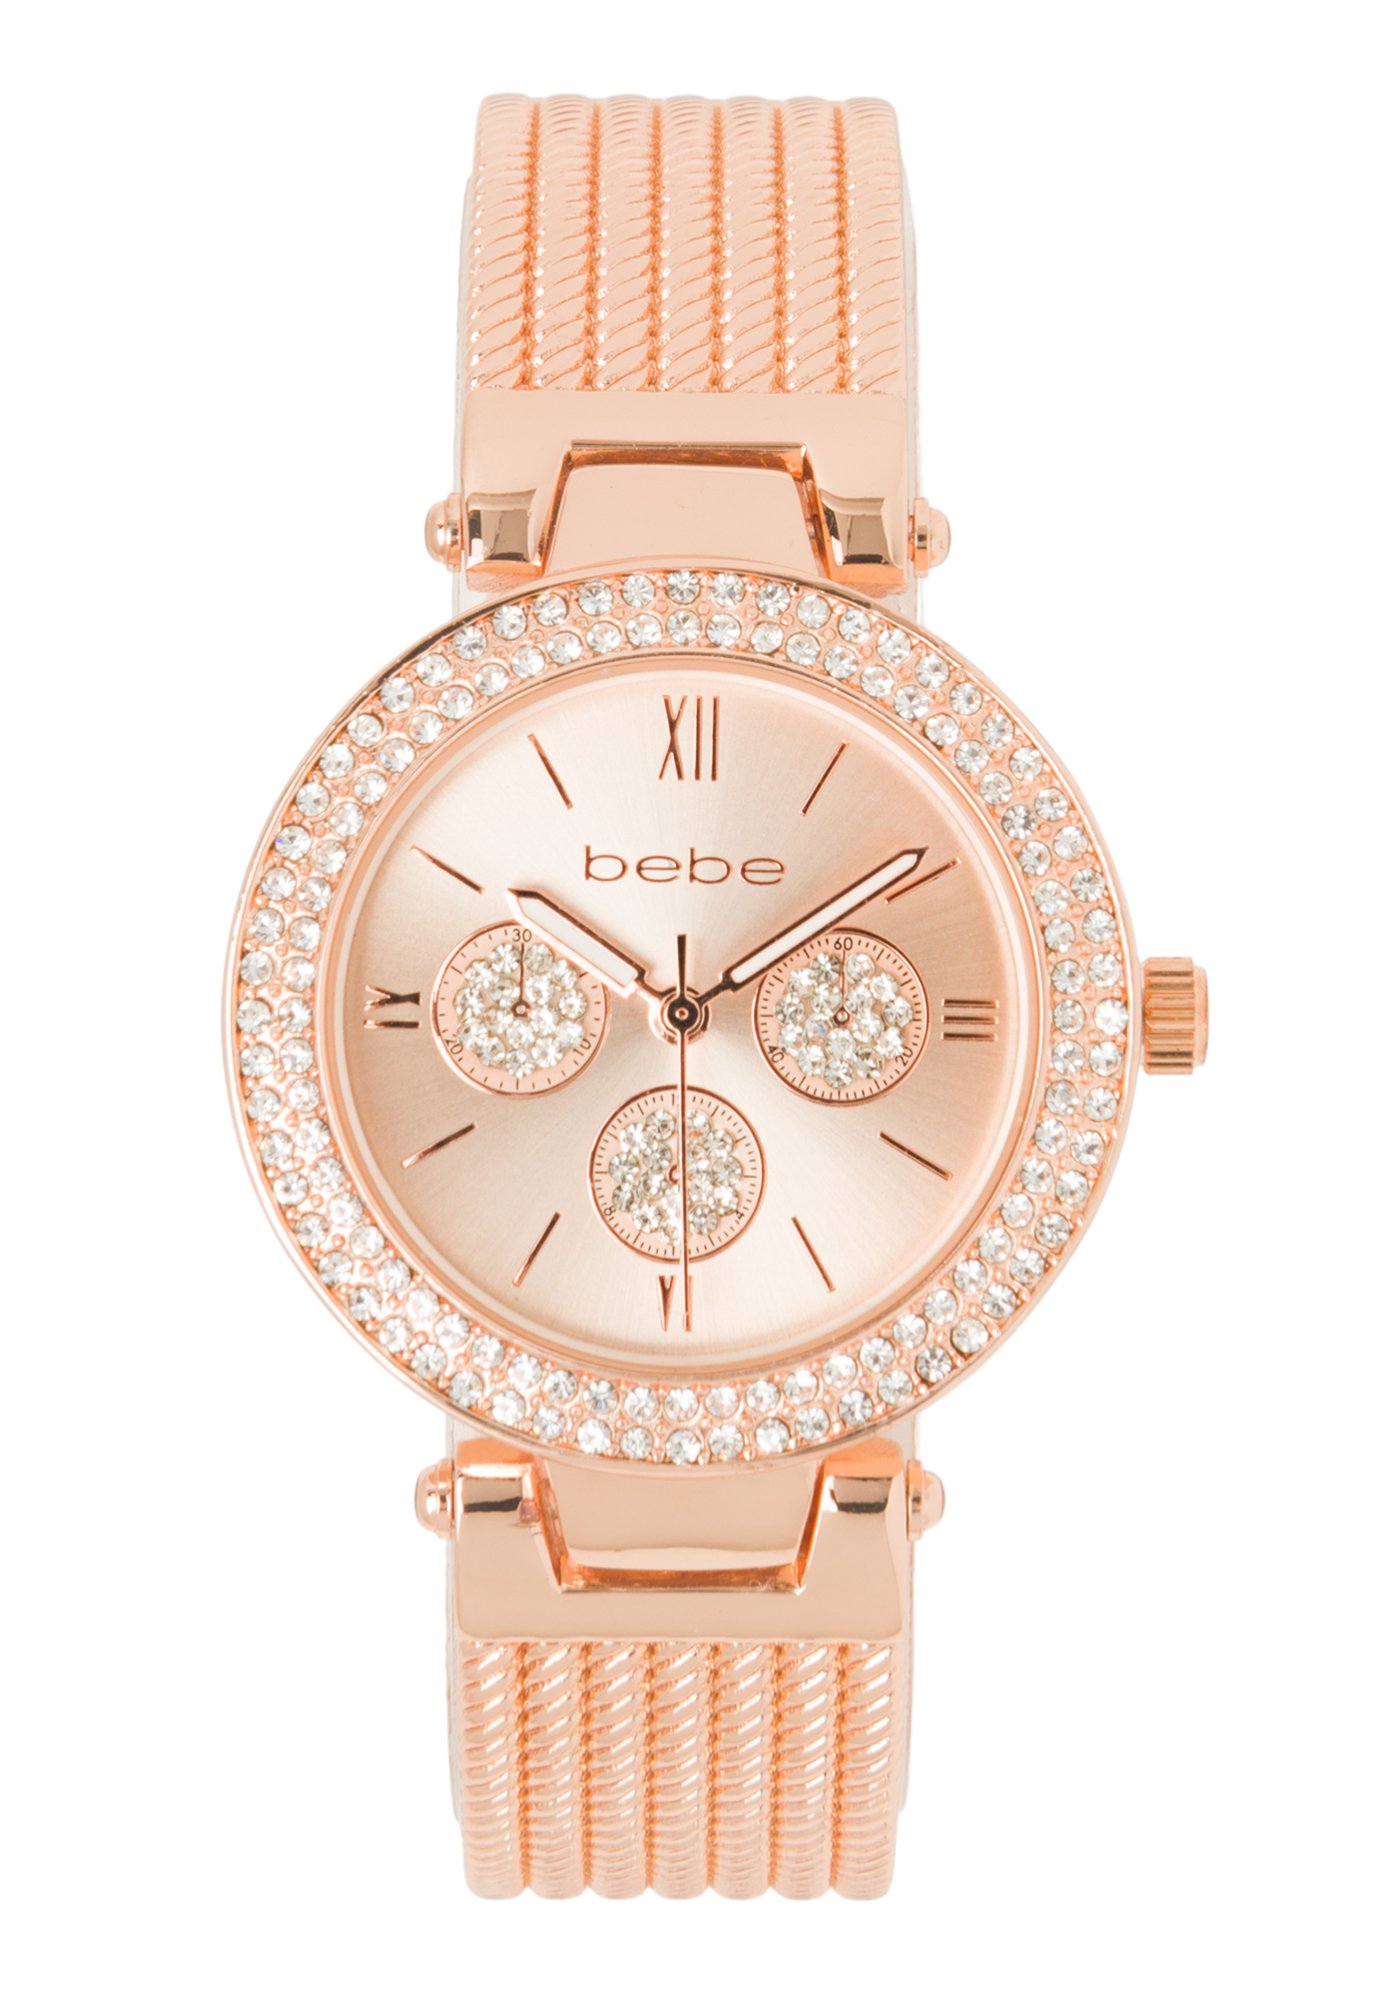 Bebe Women's Rose Gold And Crystal Watch